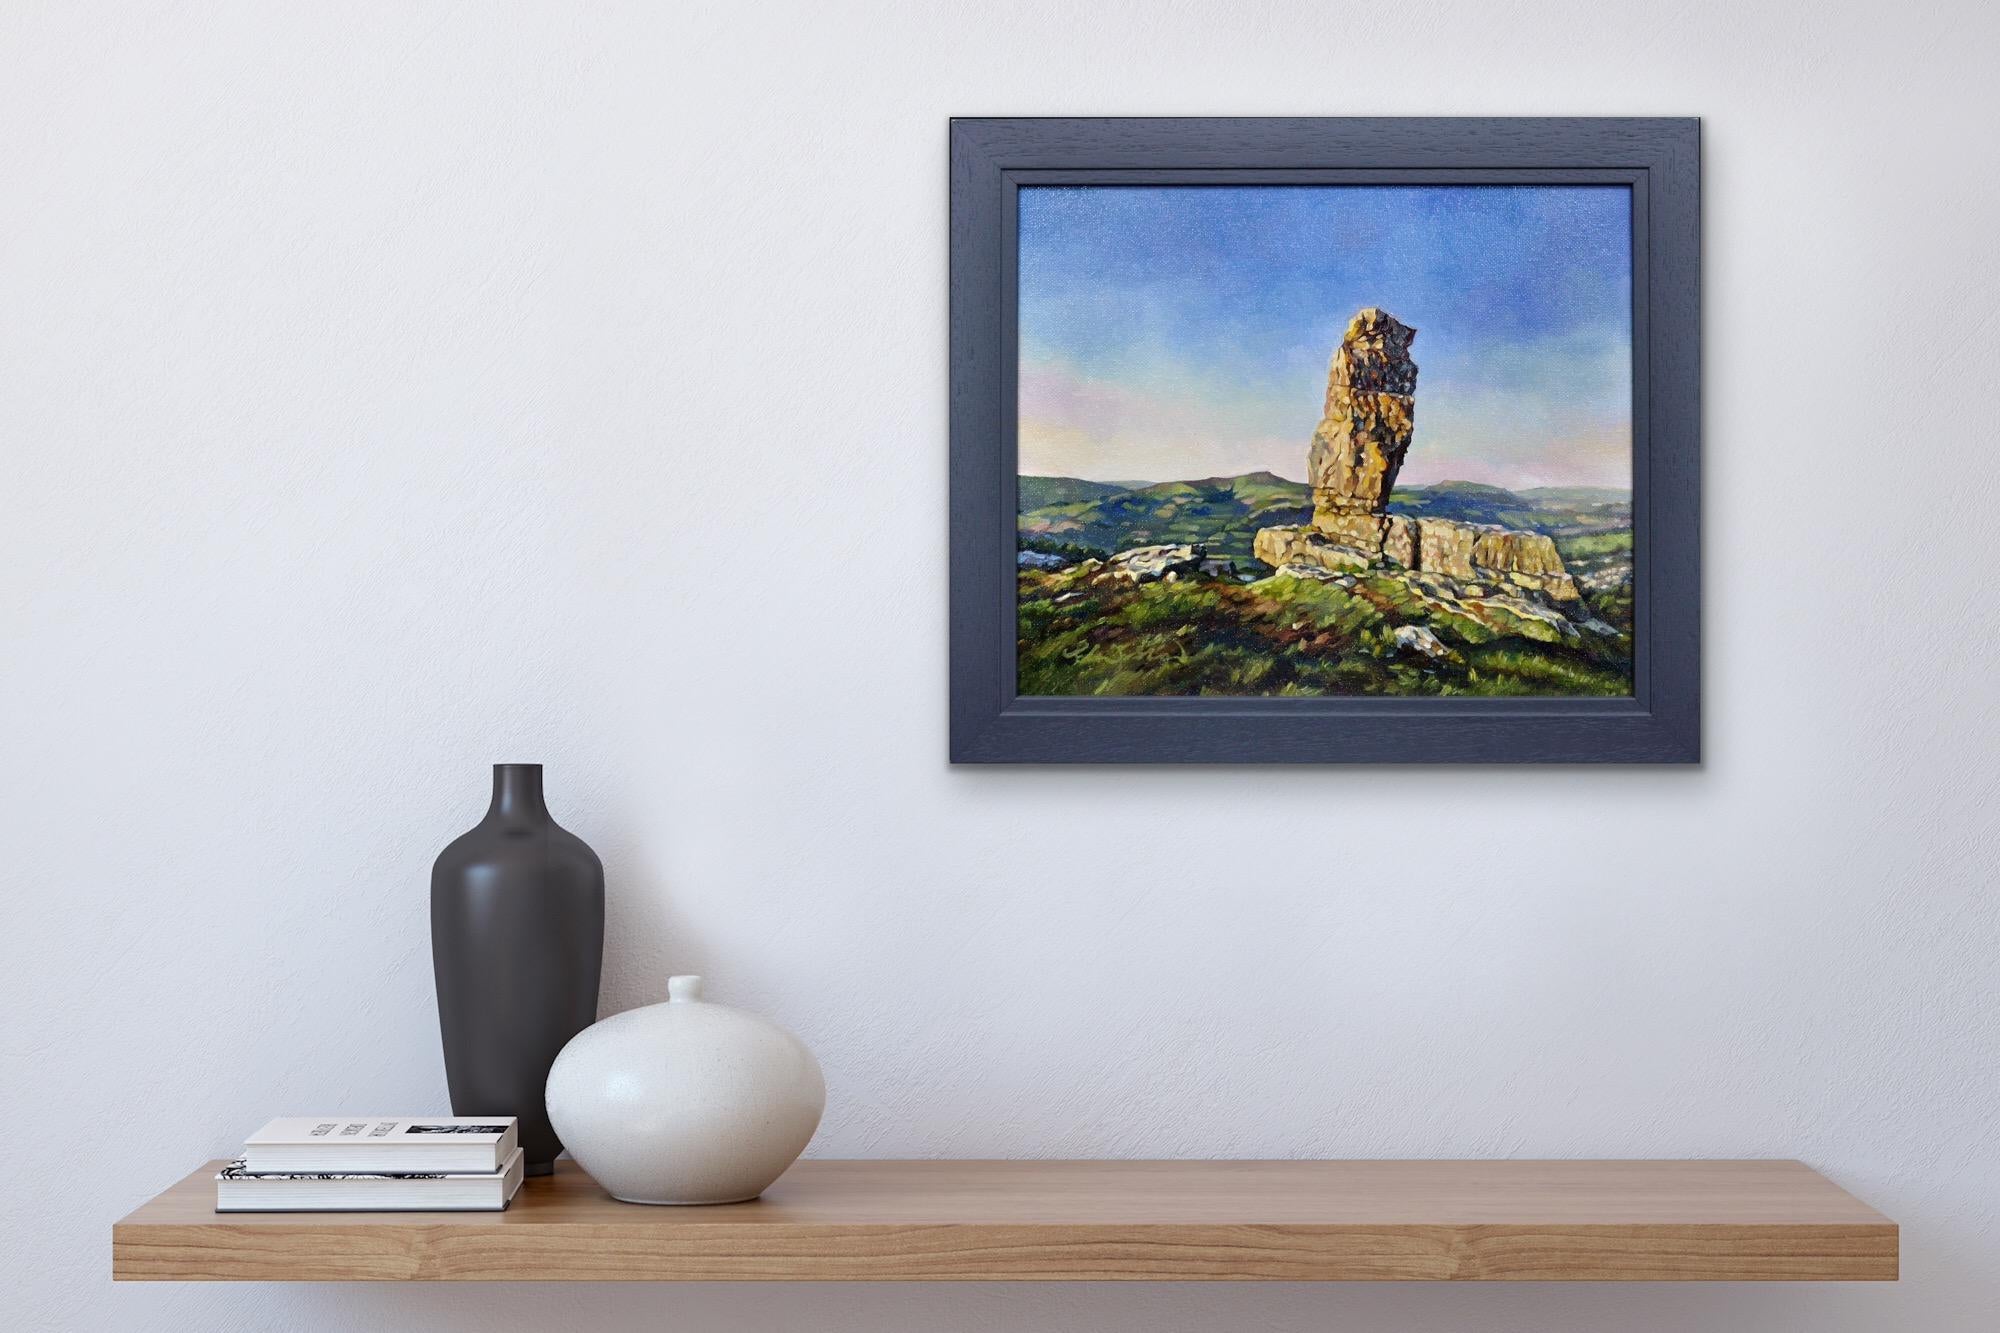 Y Bugail Unig (The Lonely Shepherd), Llangattock, Brecon Beacons. Welsh Folklore For Sale 9